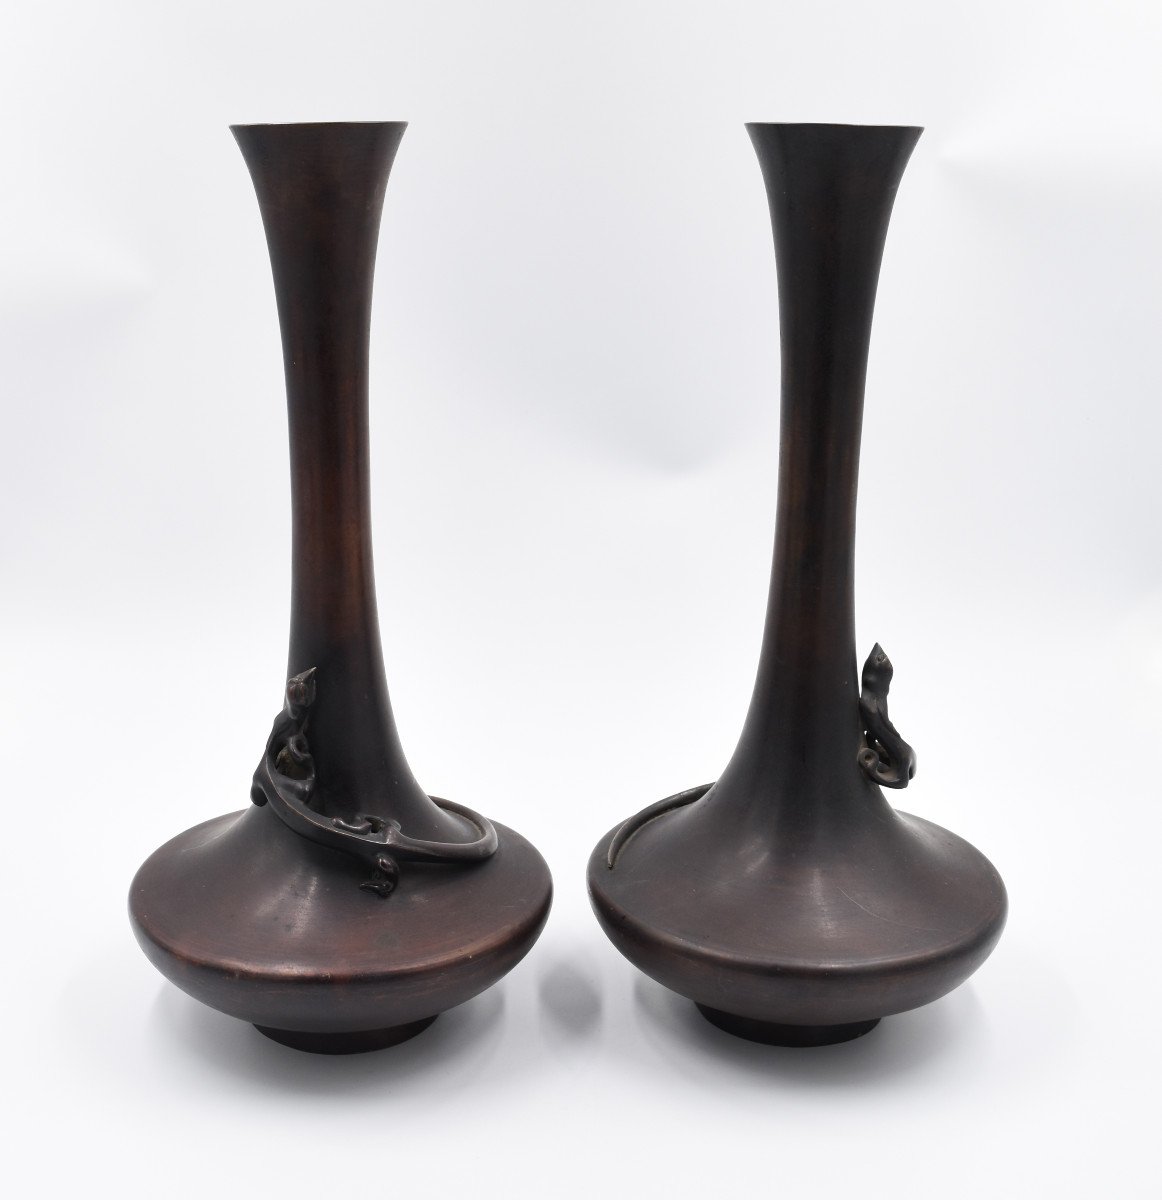 Japan Pair Of Bronze Vases Meiji Period (1868-1912) Signed Under The Base